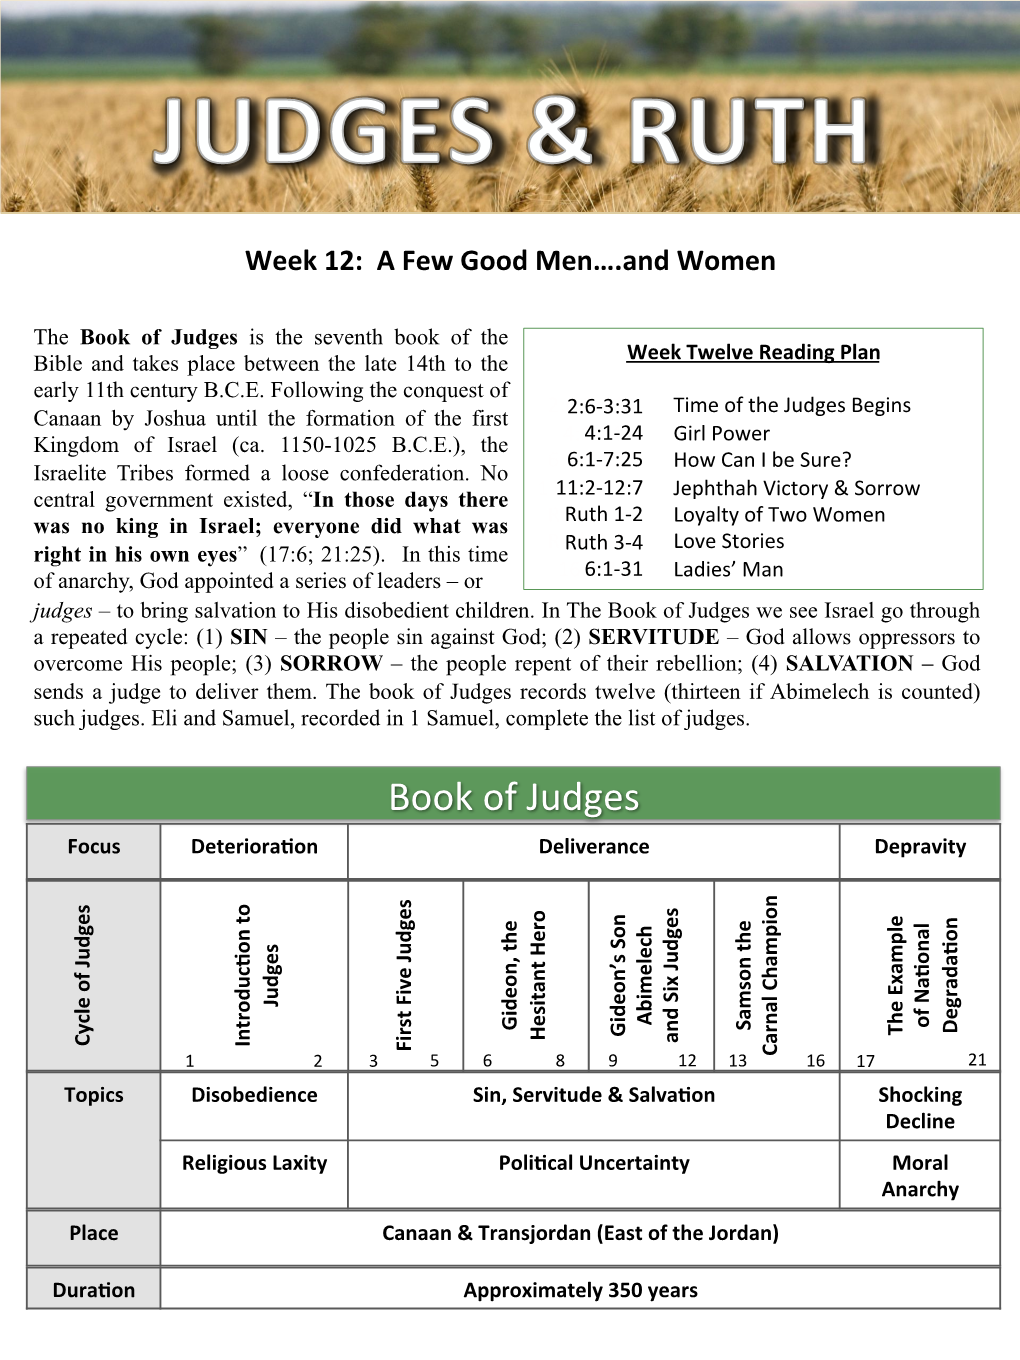 Book of Judges Is the Seventh Book of the Bible and Takes Place Between the Late 14Th to the Week Twelve Reading Plan Early 11Th Century B.C.E